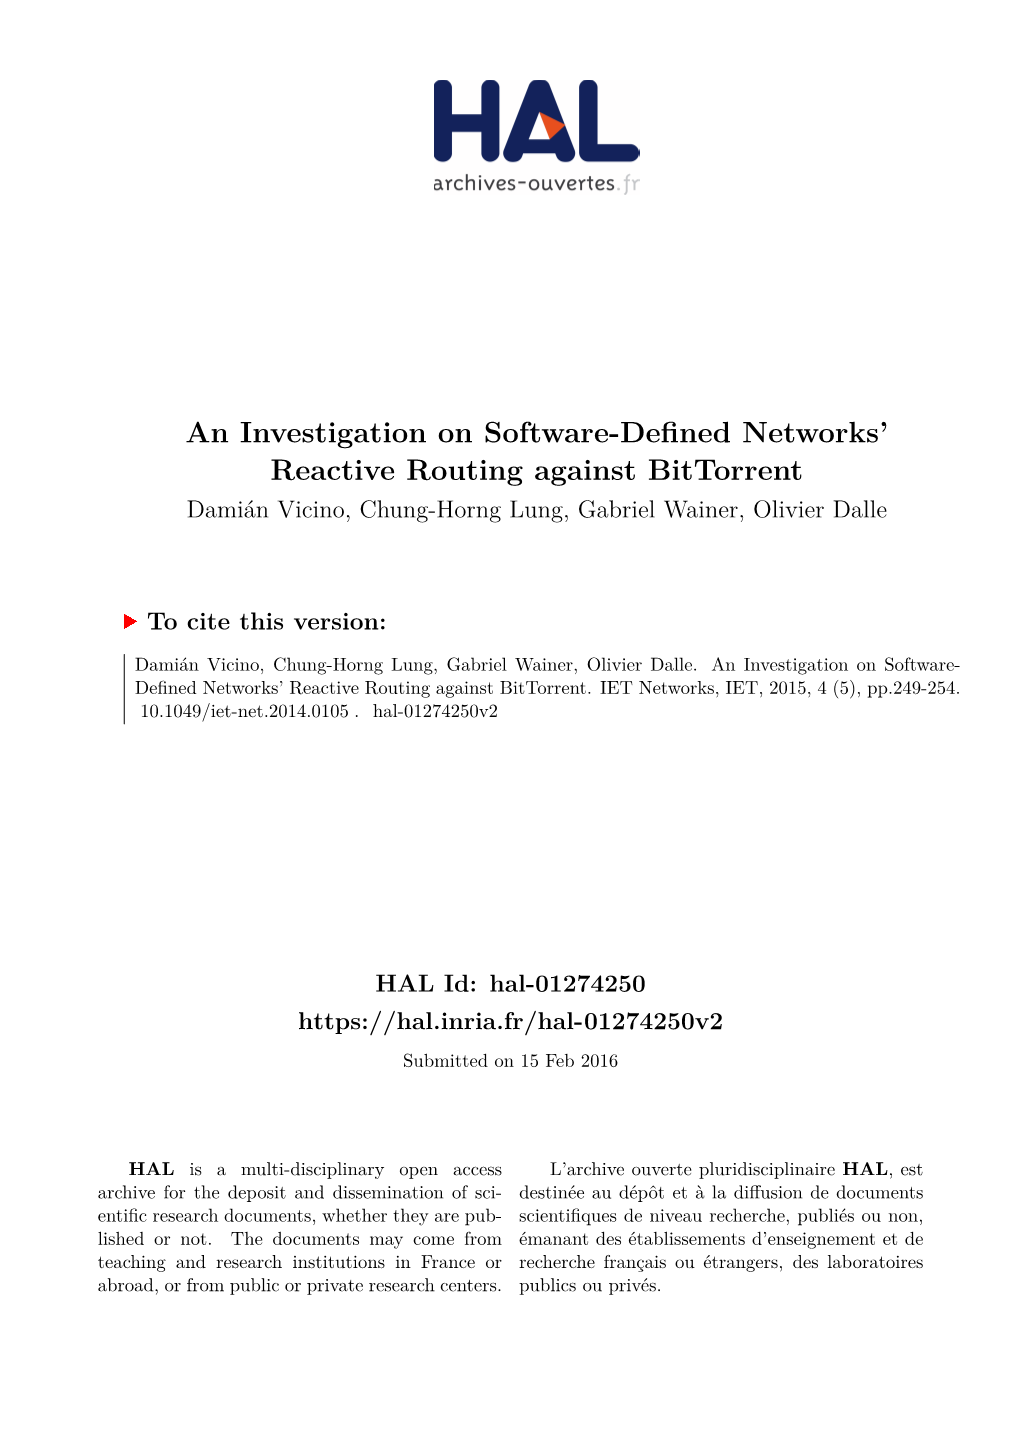 An Investigation on Software-Defined Networks' Reactive Routing Against